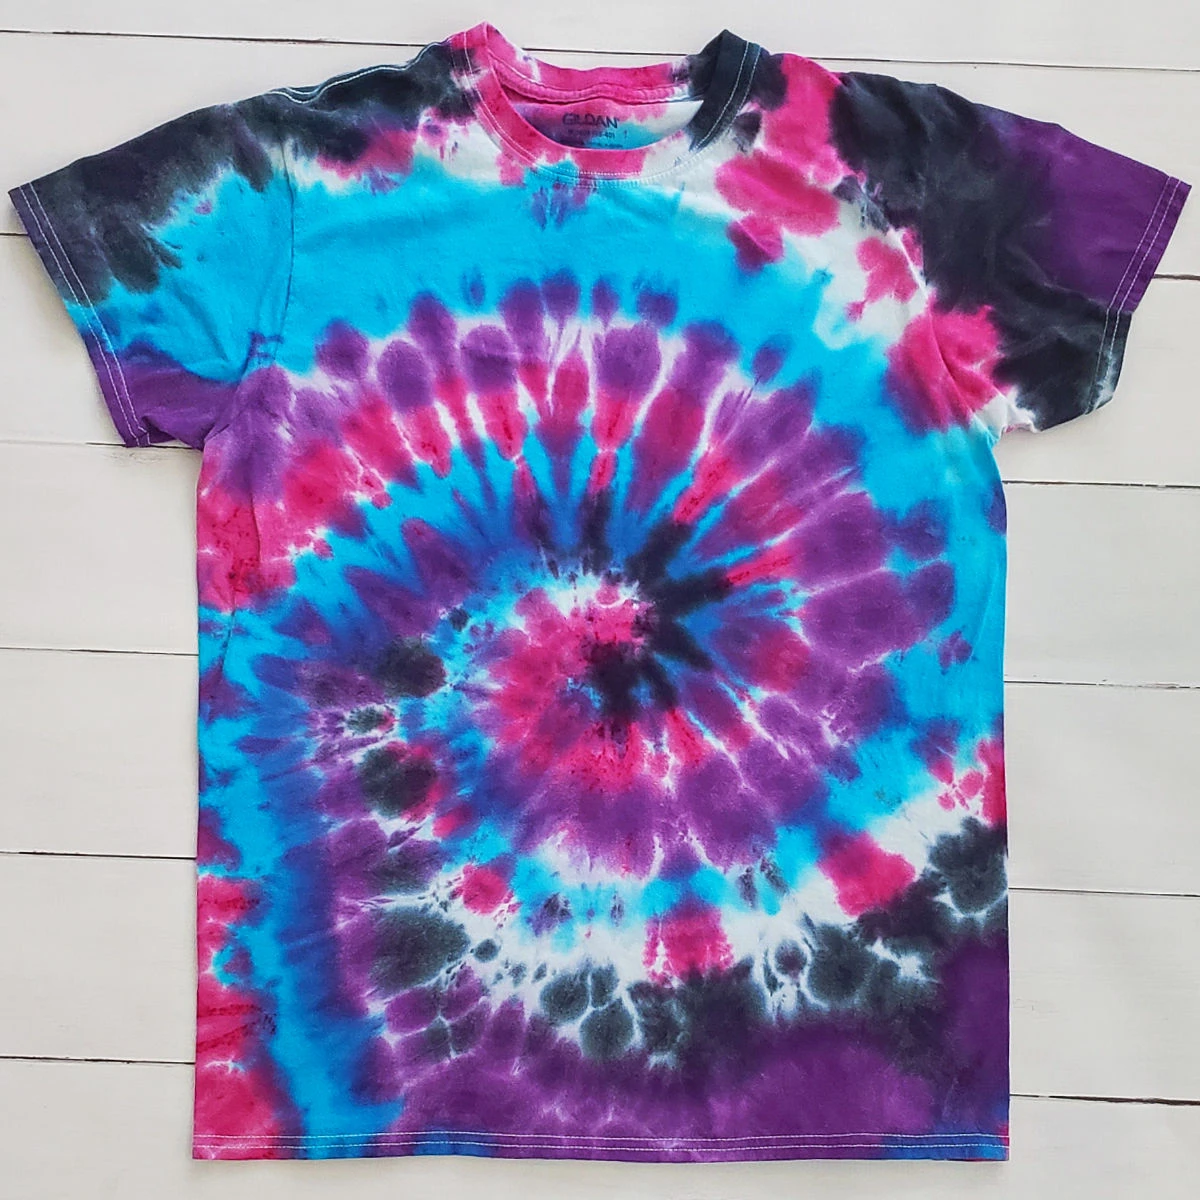 Spiral tie dye t-shirt with galaxy colors: black, purple, pink, blue and white.